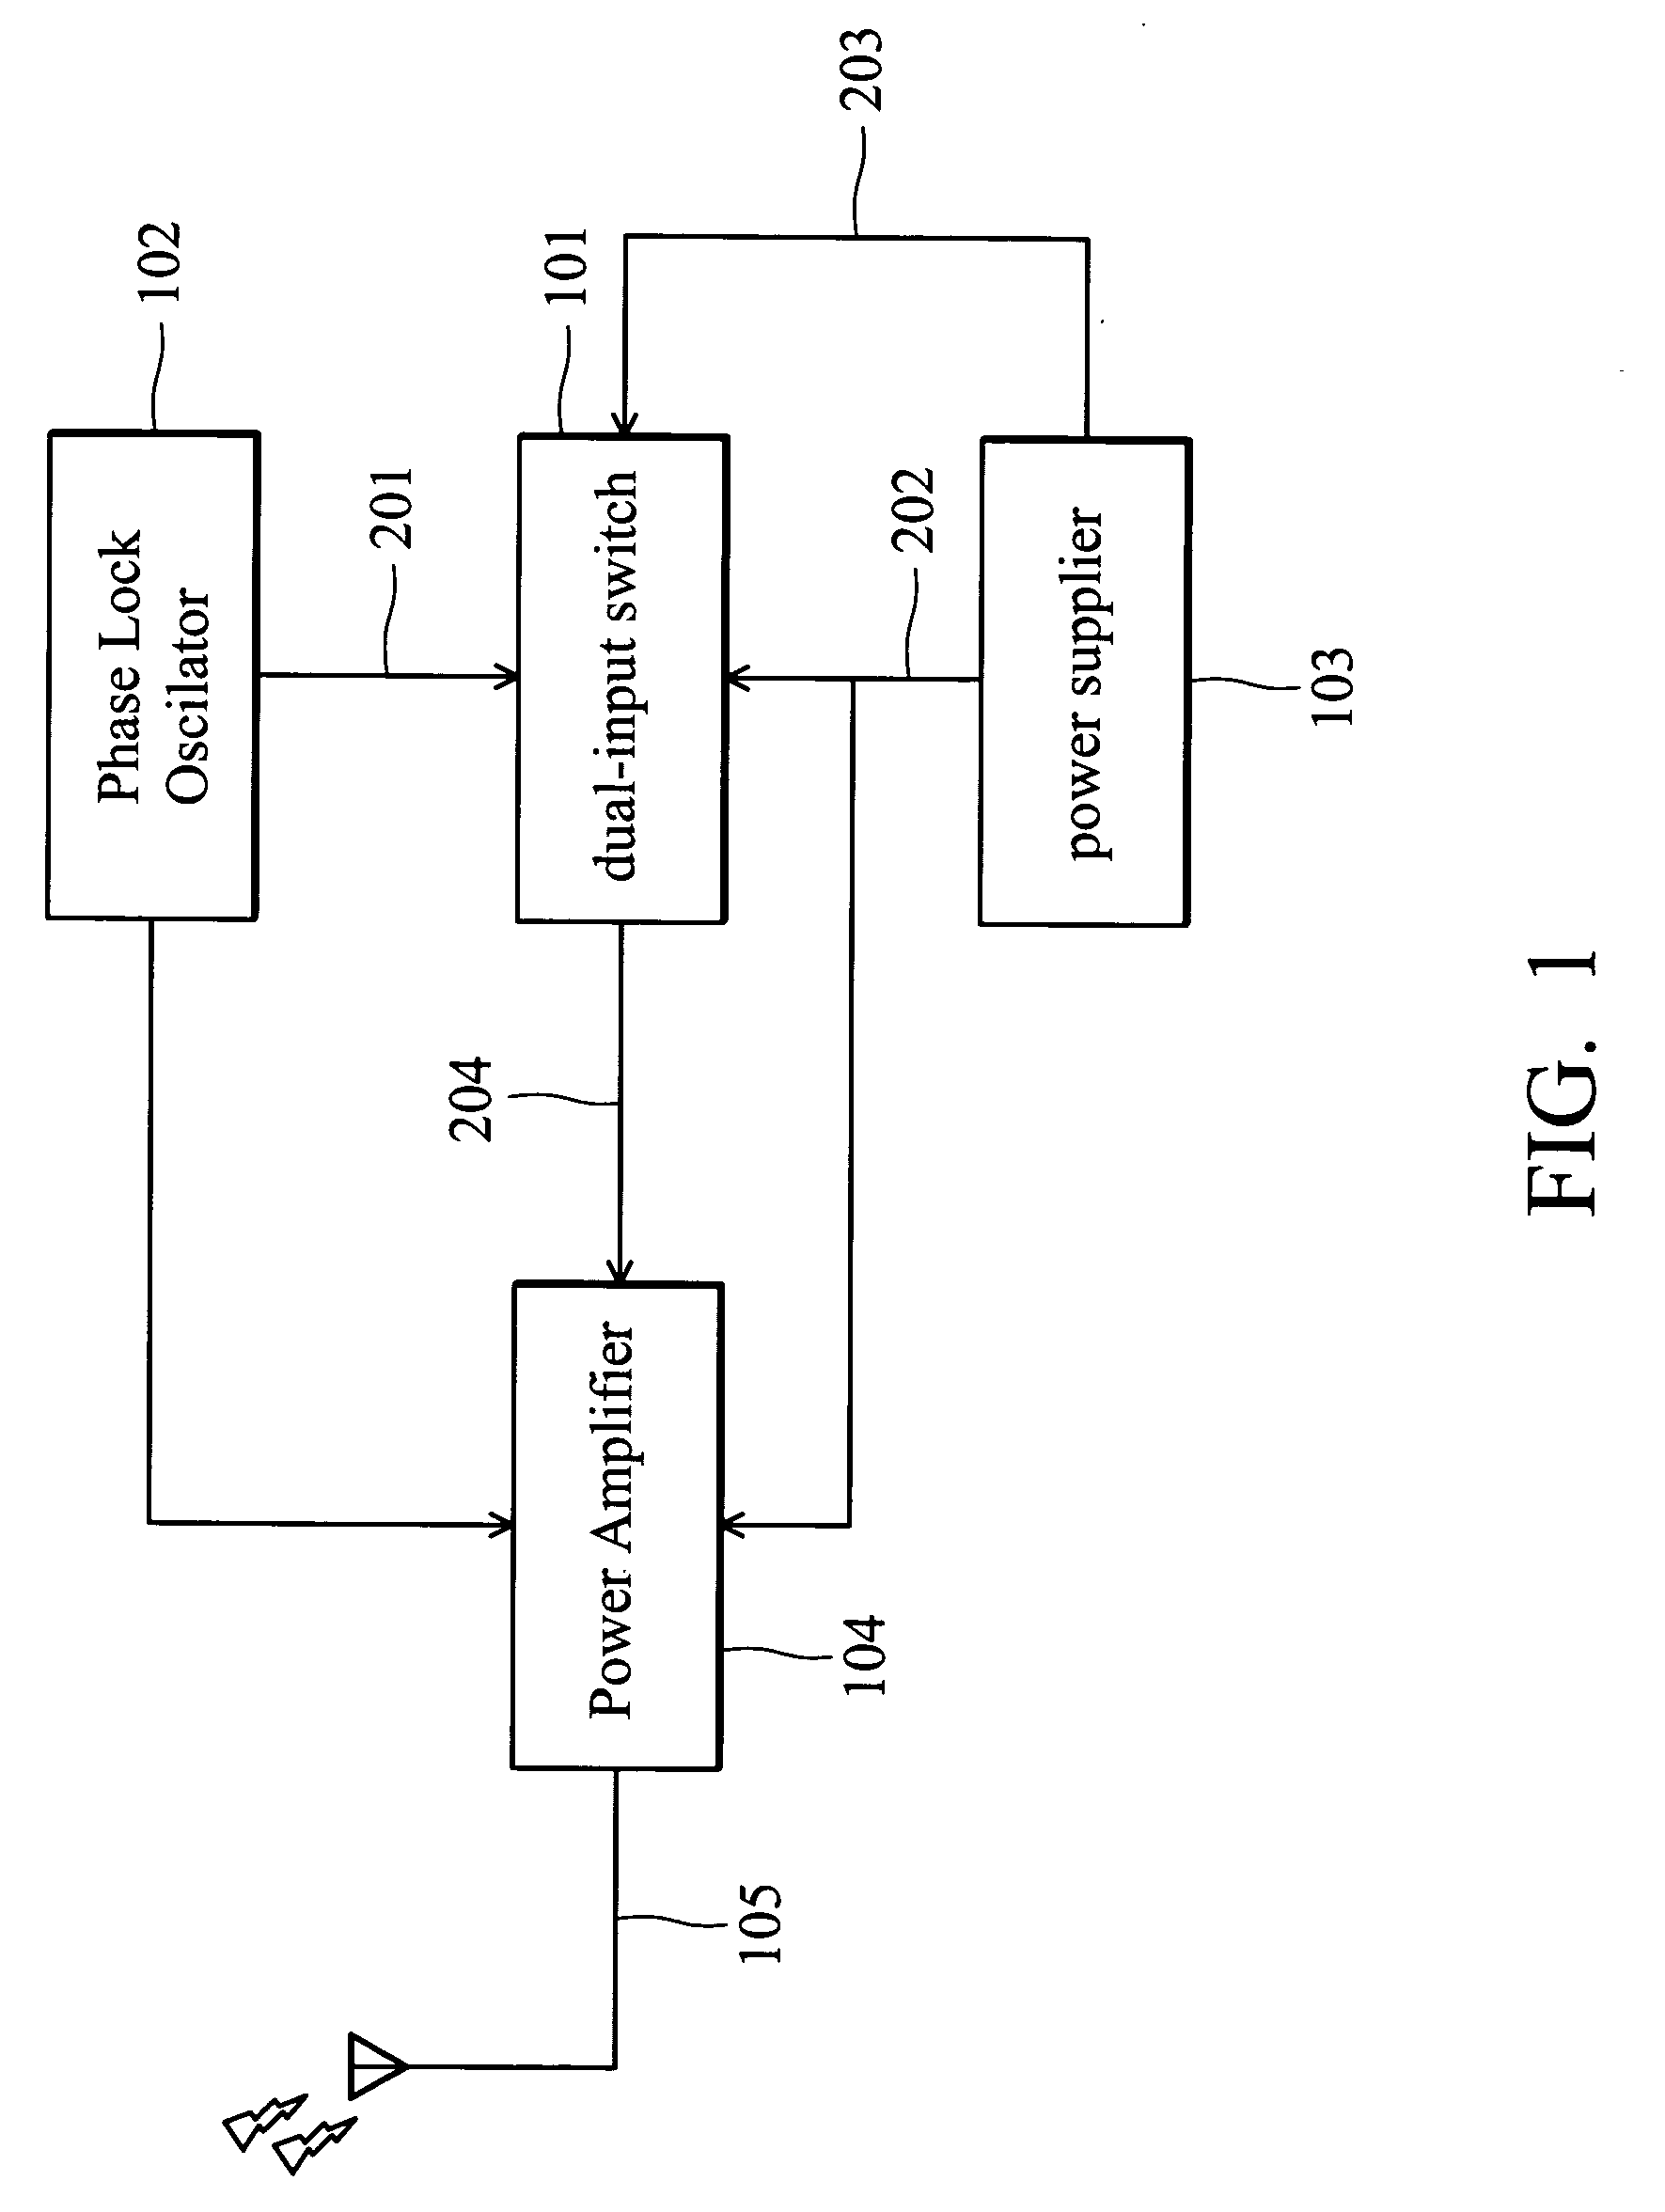 Very small aperture terminal with dual-input DC power control